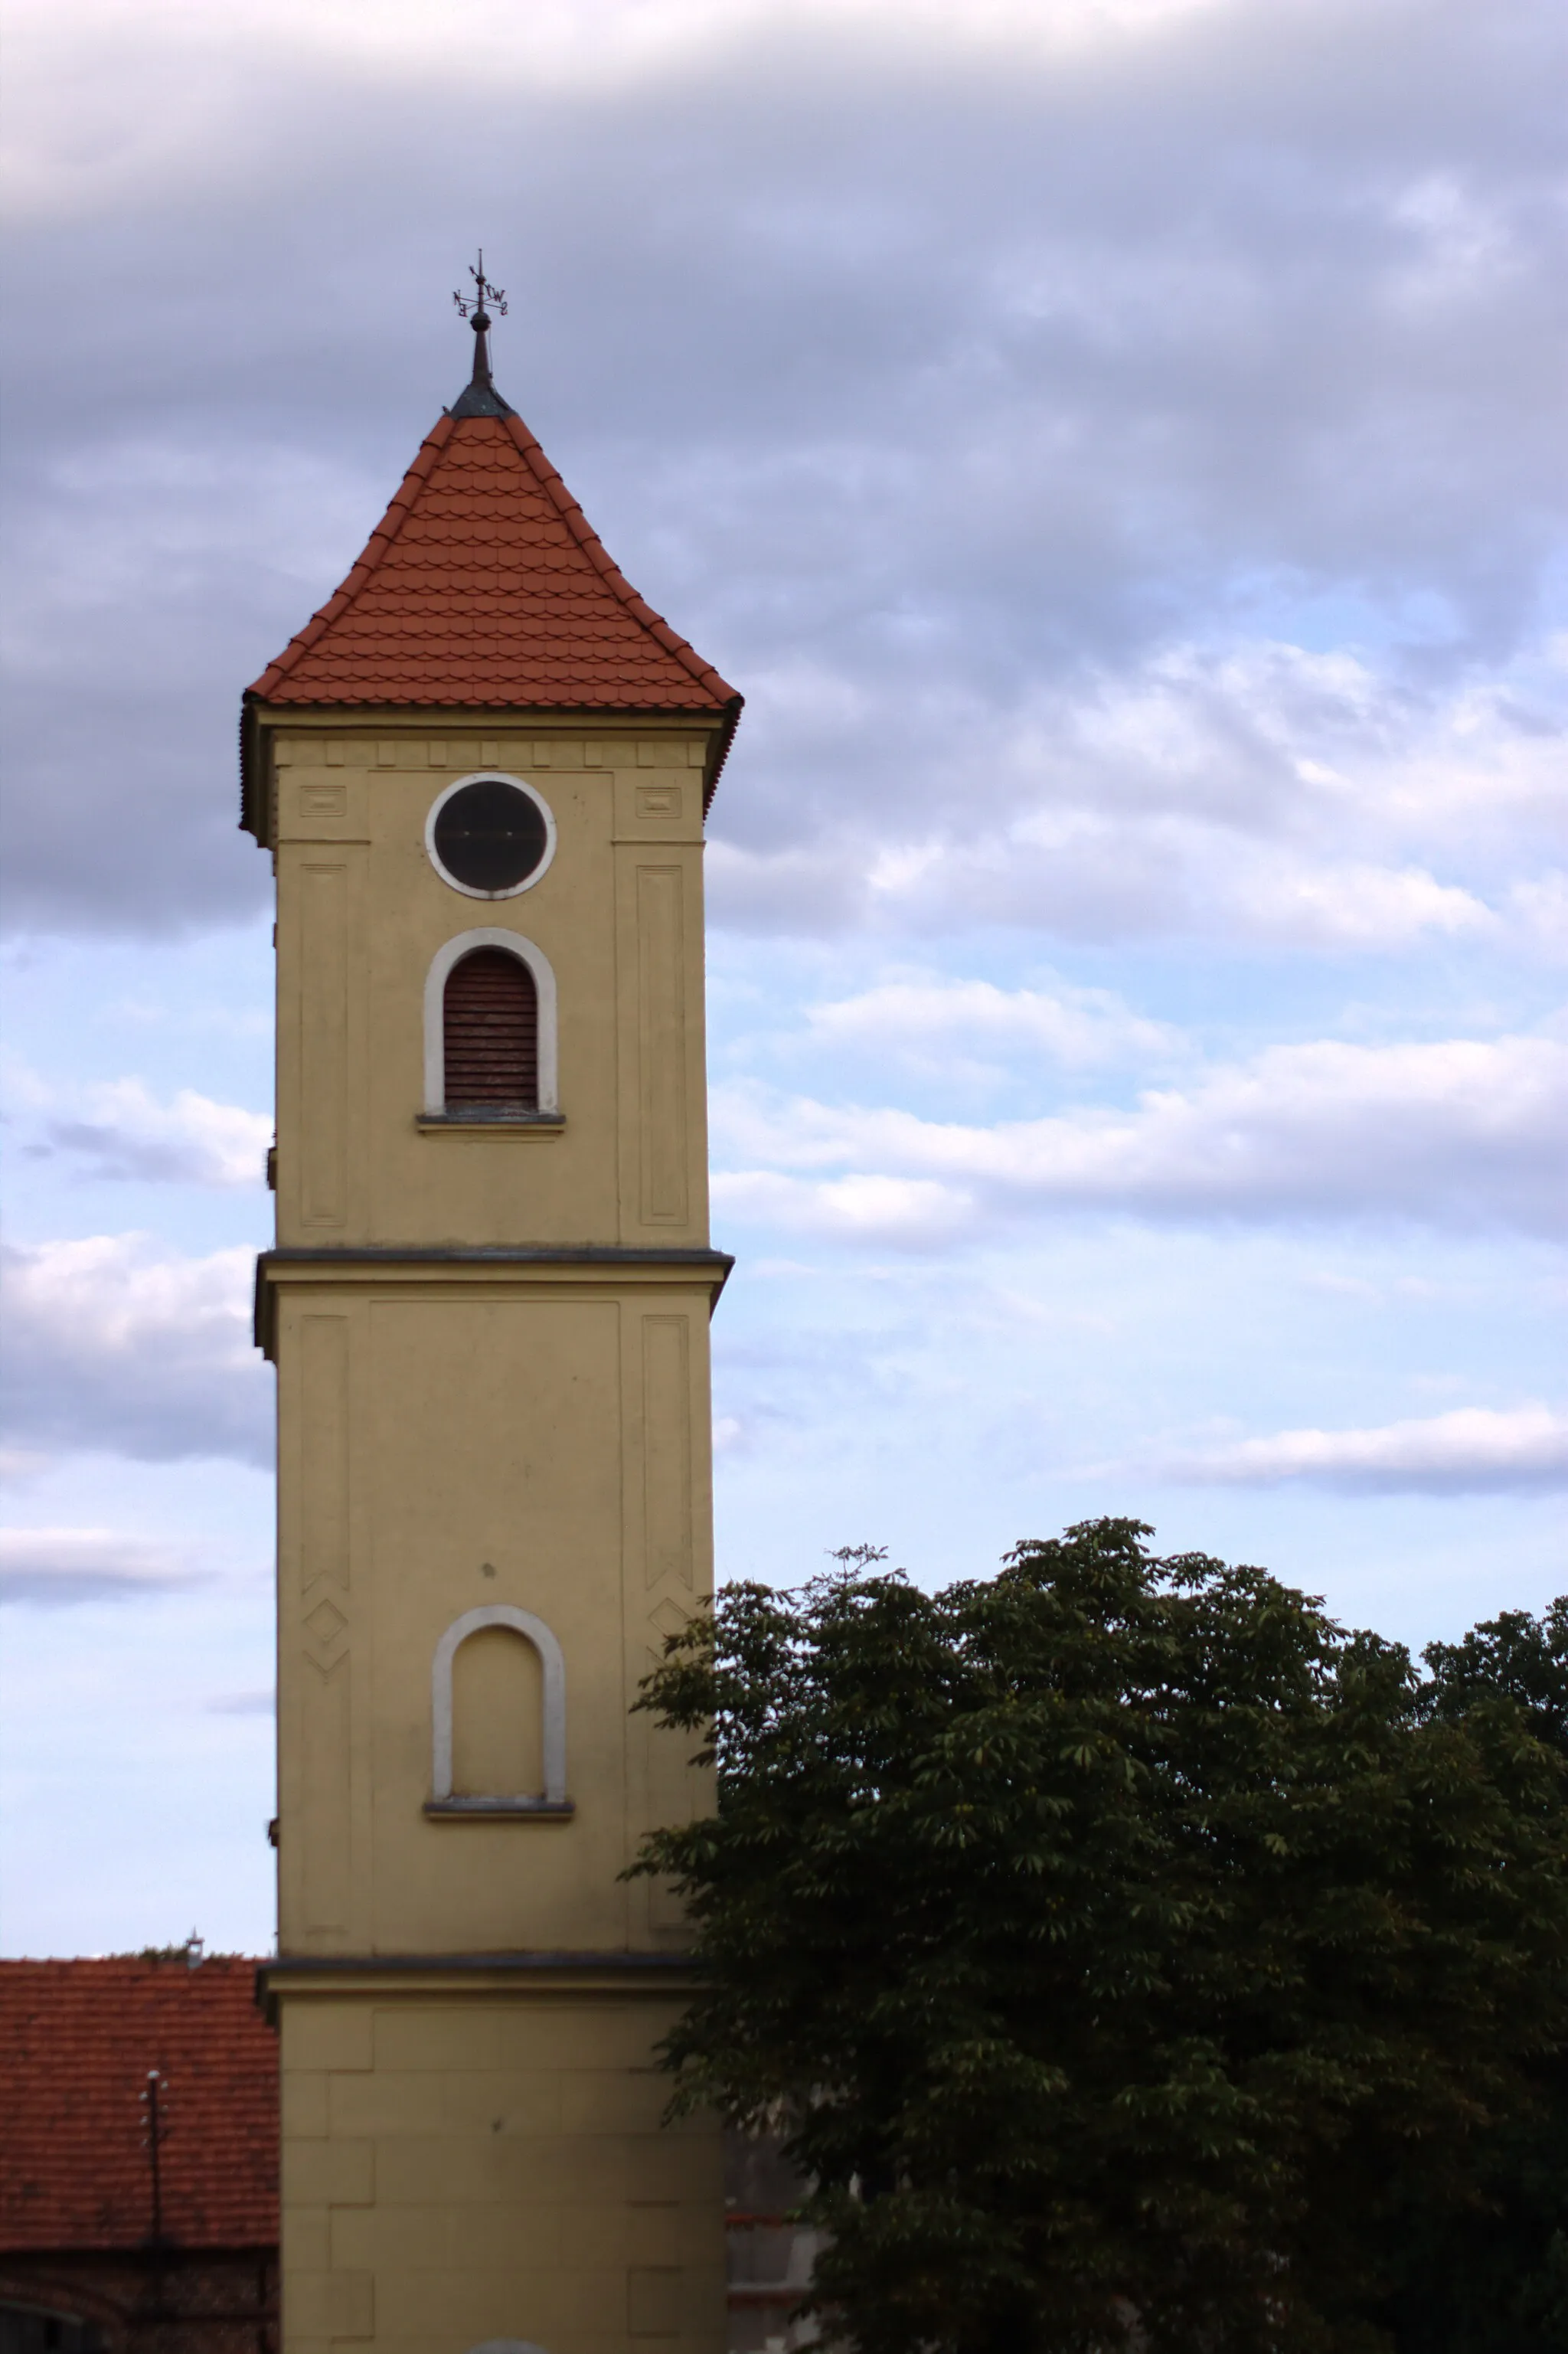 Photo showing: Most likely a bell tower in the village of Piekary, South Silesian Voivodeship, Poland